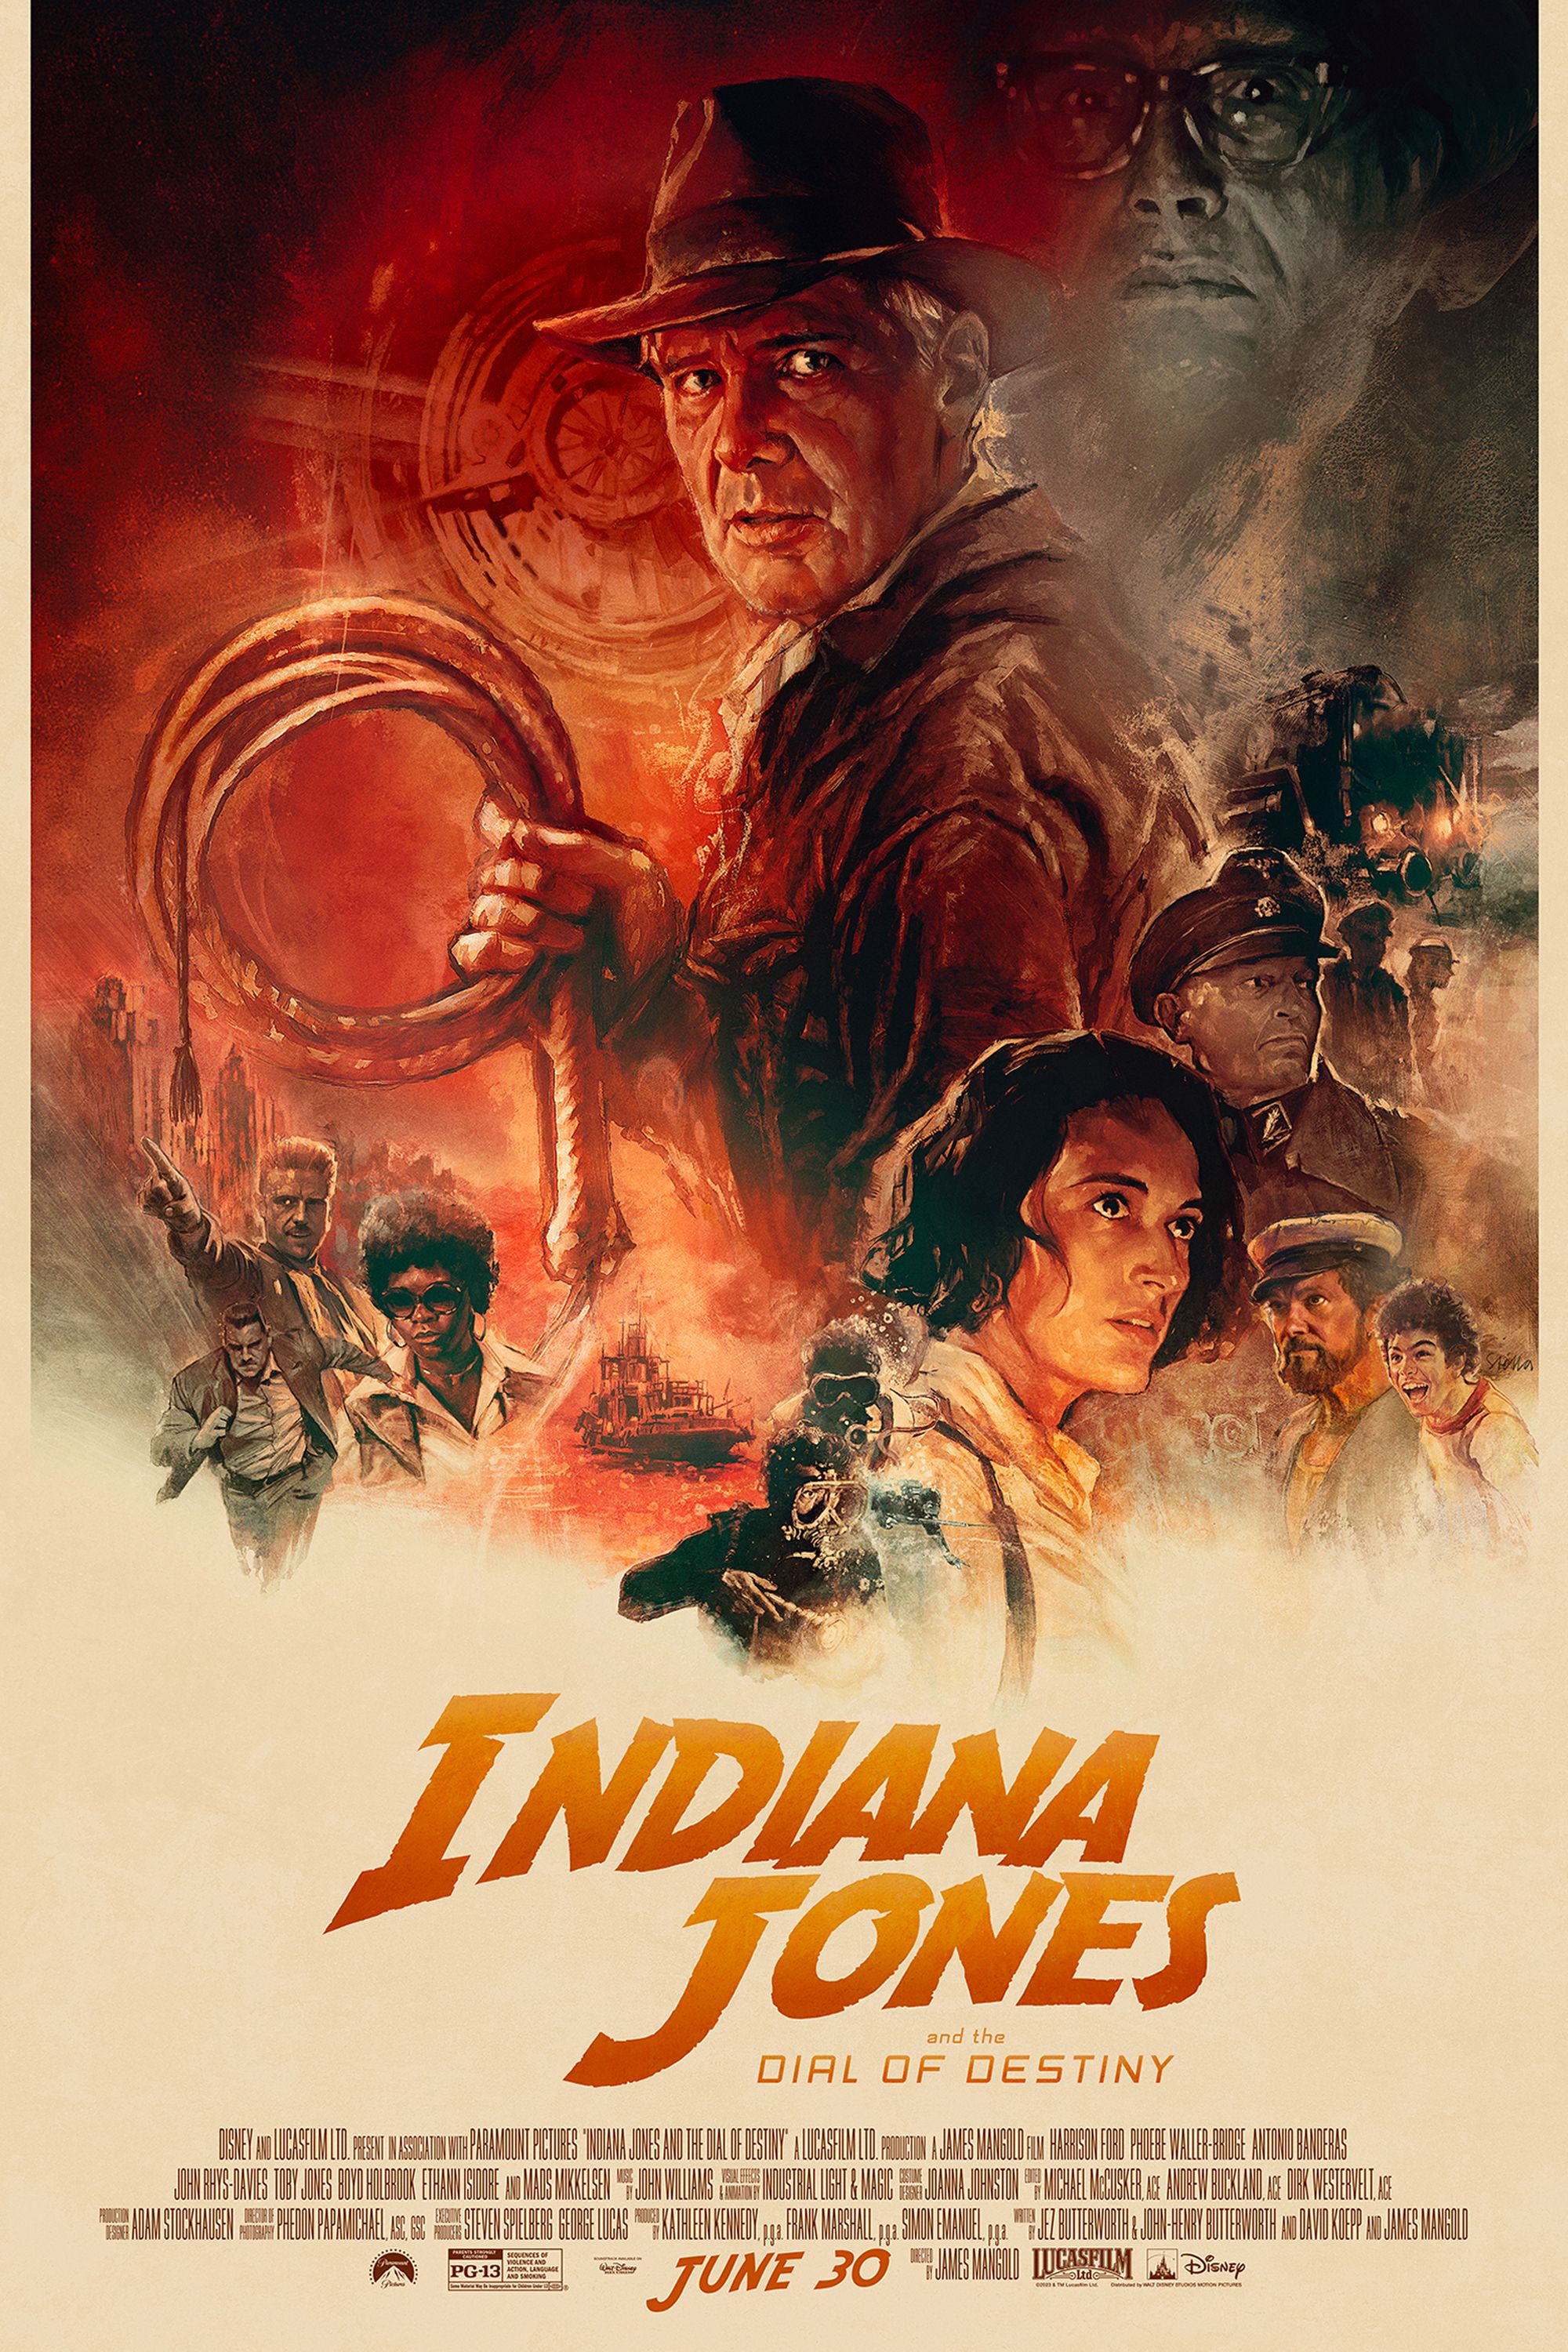 Indiana Jones 5 First Clip Released Get A Look At Dial Of Destiny S Action